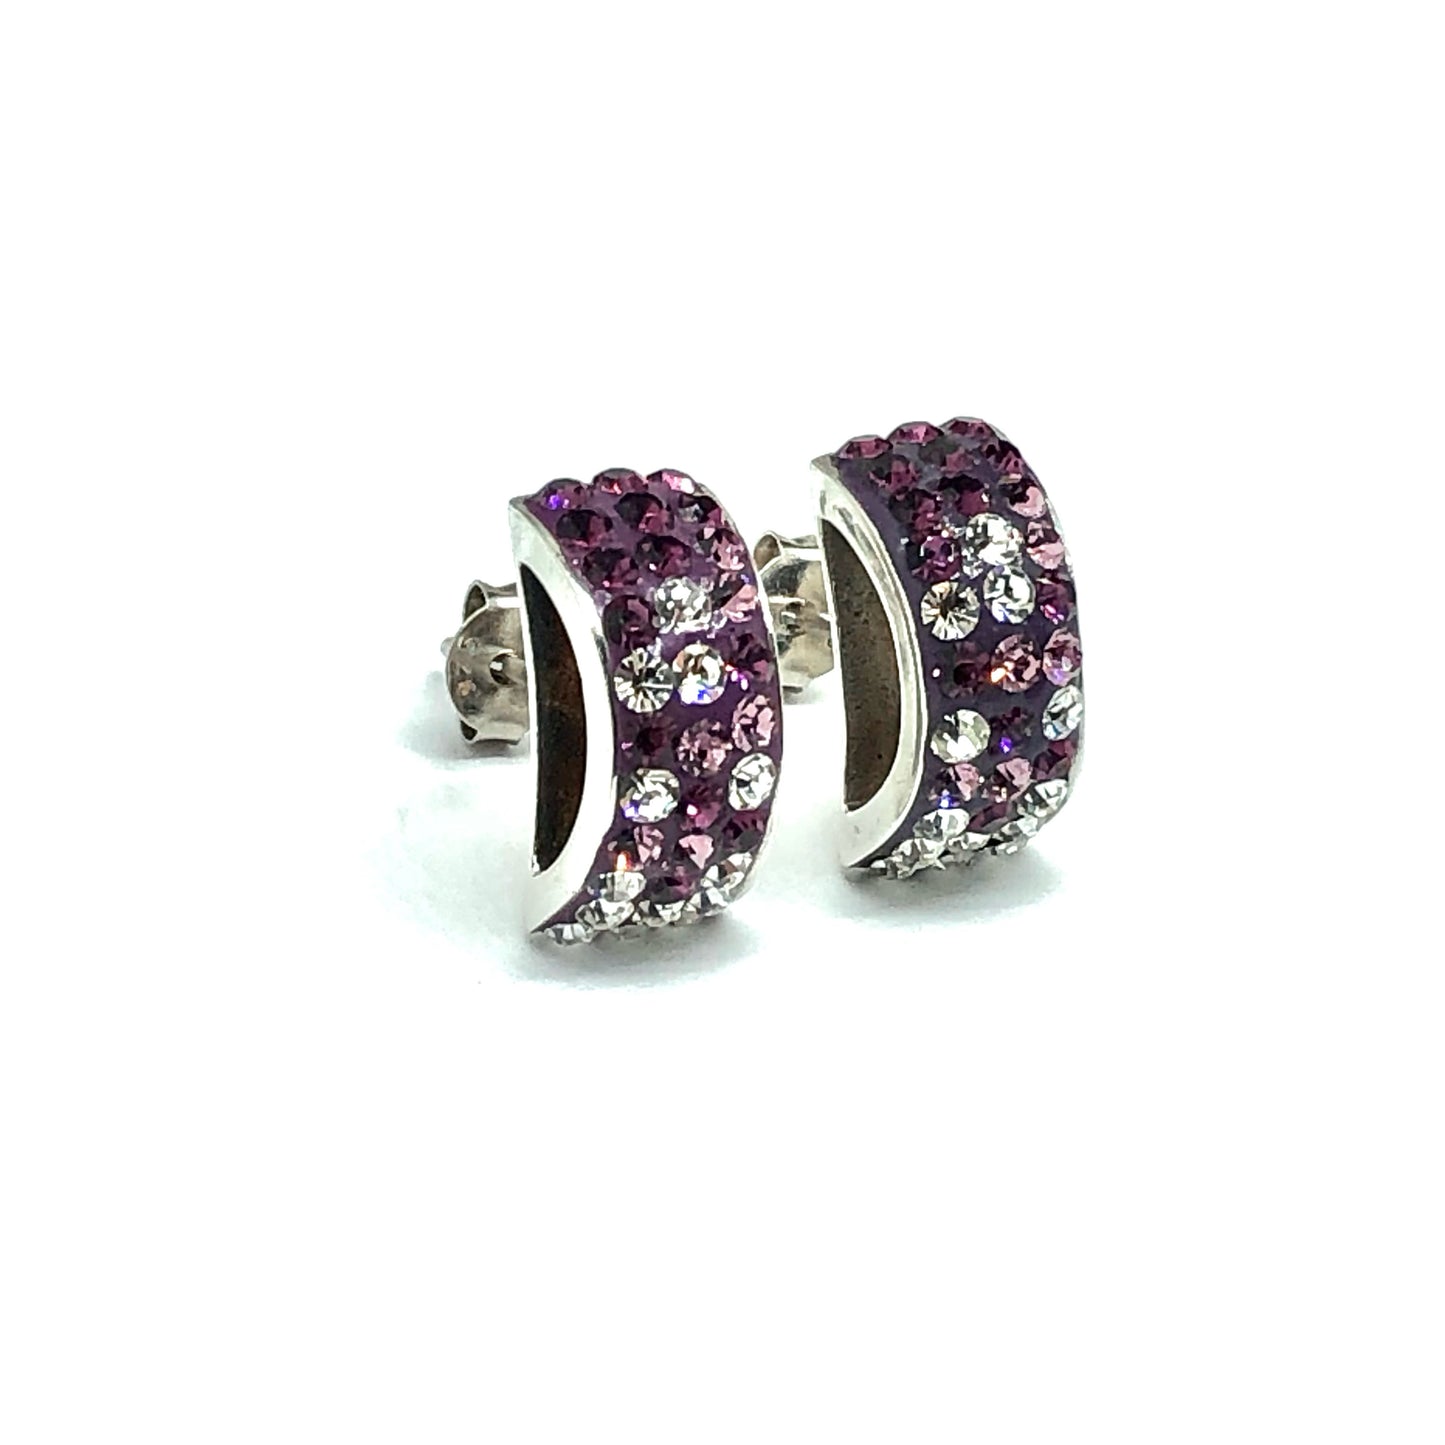 Sterling Silver Dome Style Shimmering Purple Ombre Crystal Earrings - Blingschlingers.com in USA